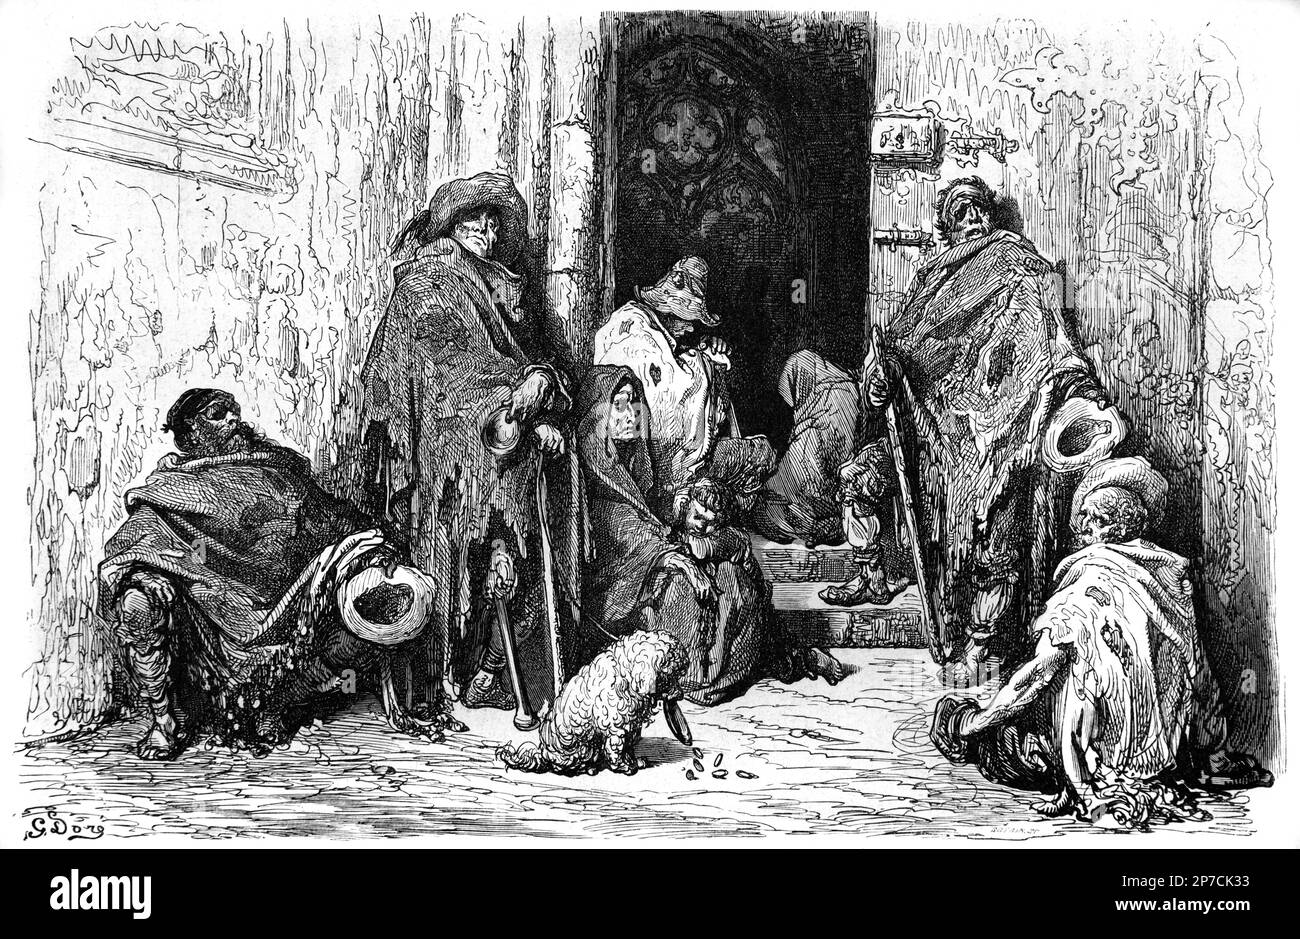 Beggars Outside Barcelona Cathedral Spain. Vintage or Historical Engraving or Illustration by Gustave Doré 1862 Stock Photo